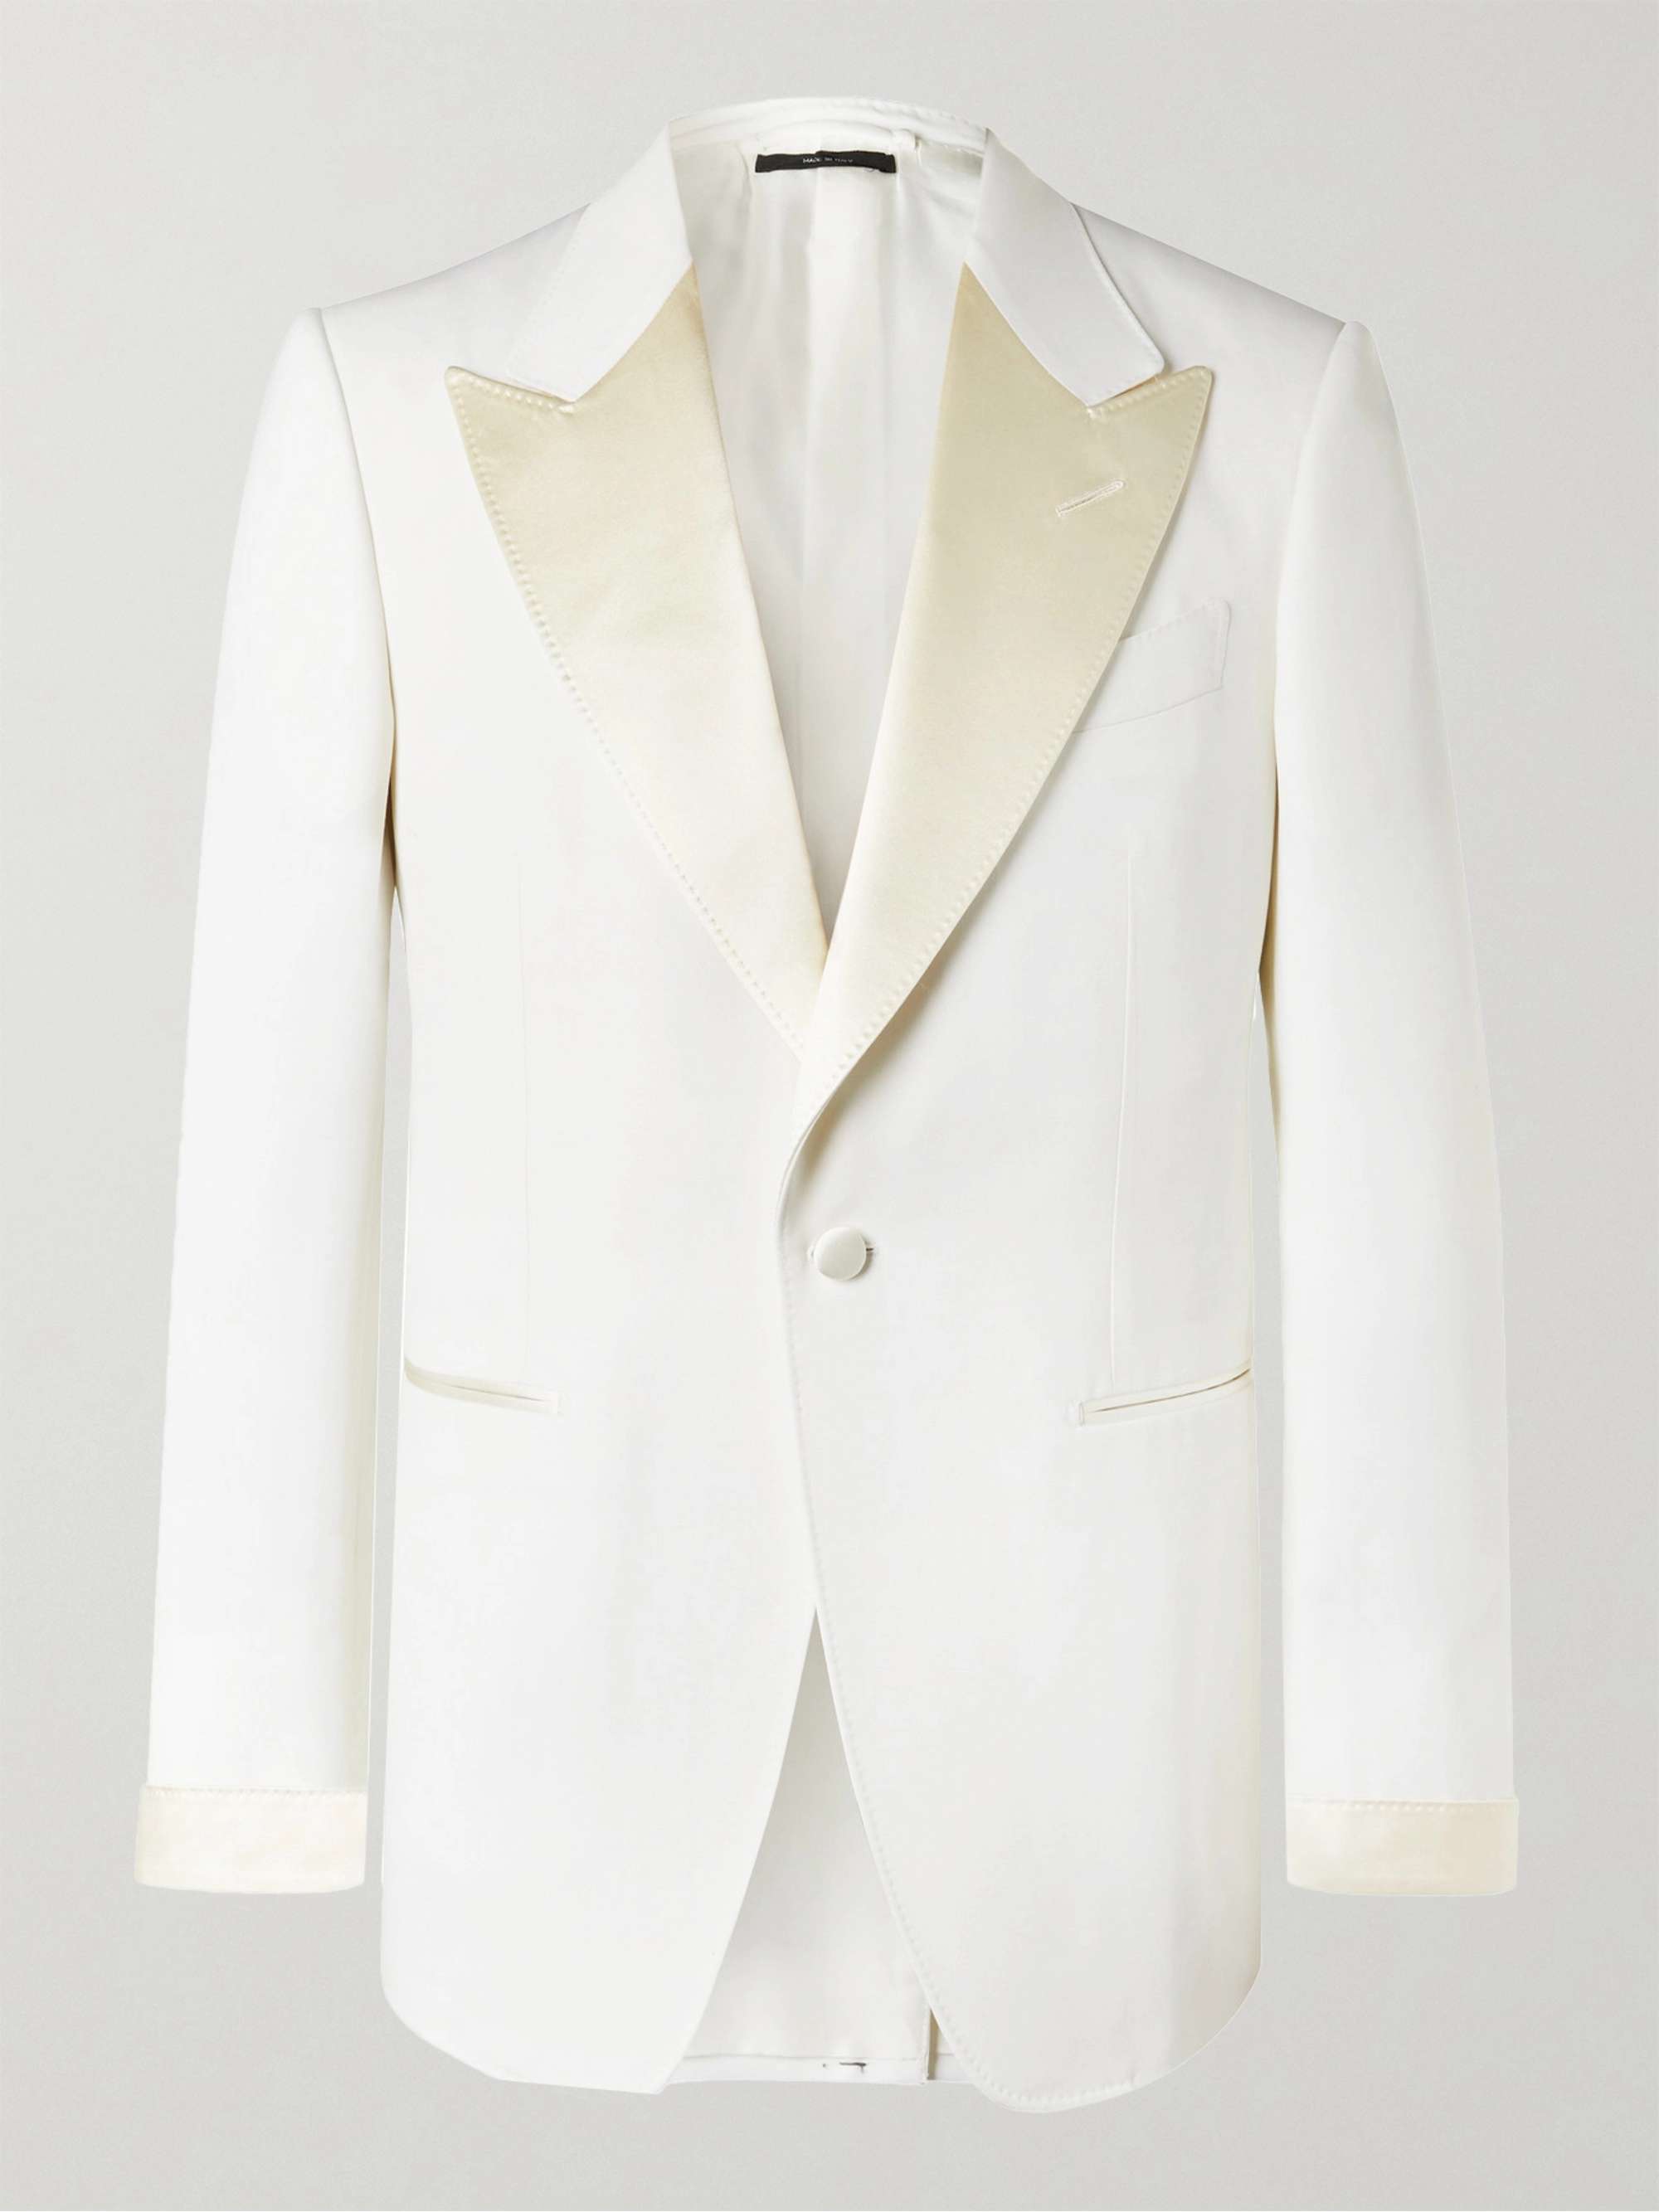 TOM FORD Slim-Fit Satin-Trimmed Wool and Mohair-Blend Tuxedo Jacket